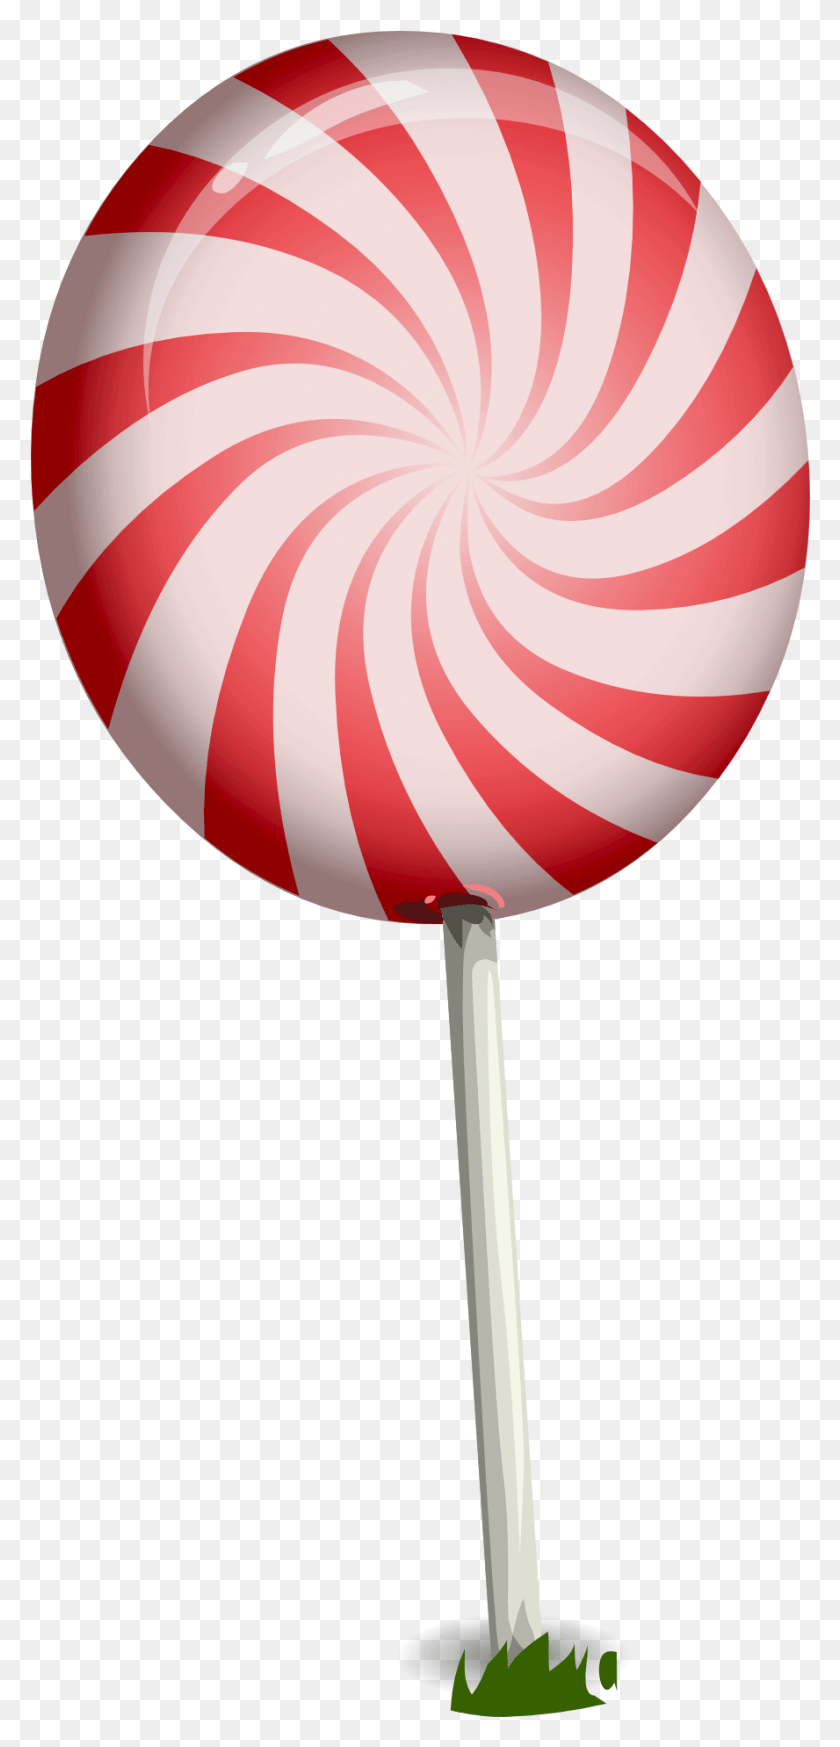 888x1921 Candy Lollipop Transparent Image Candy, Food, Lamp, Balloon HD PNG Download